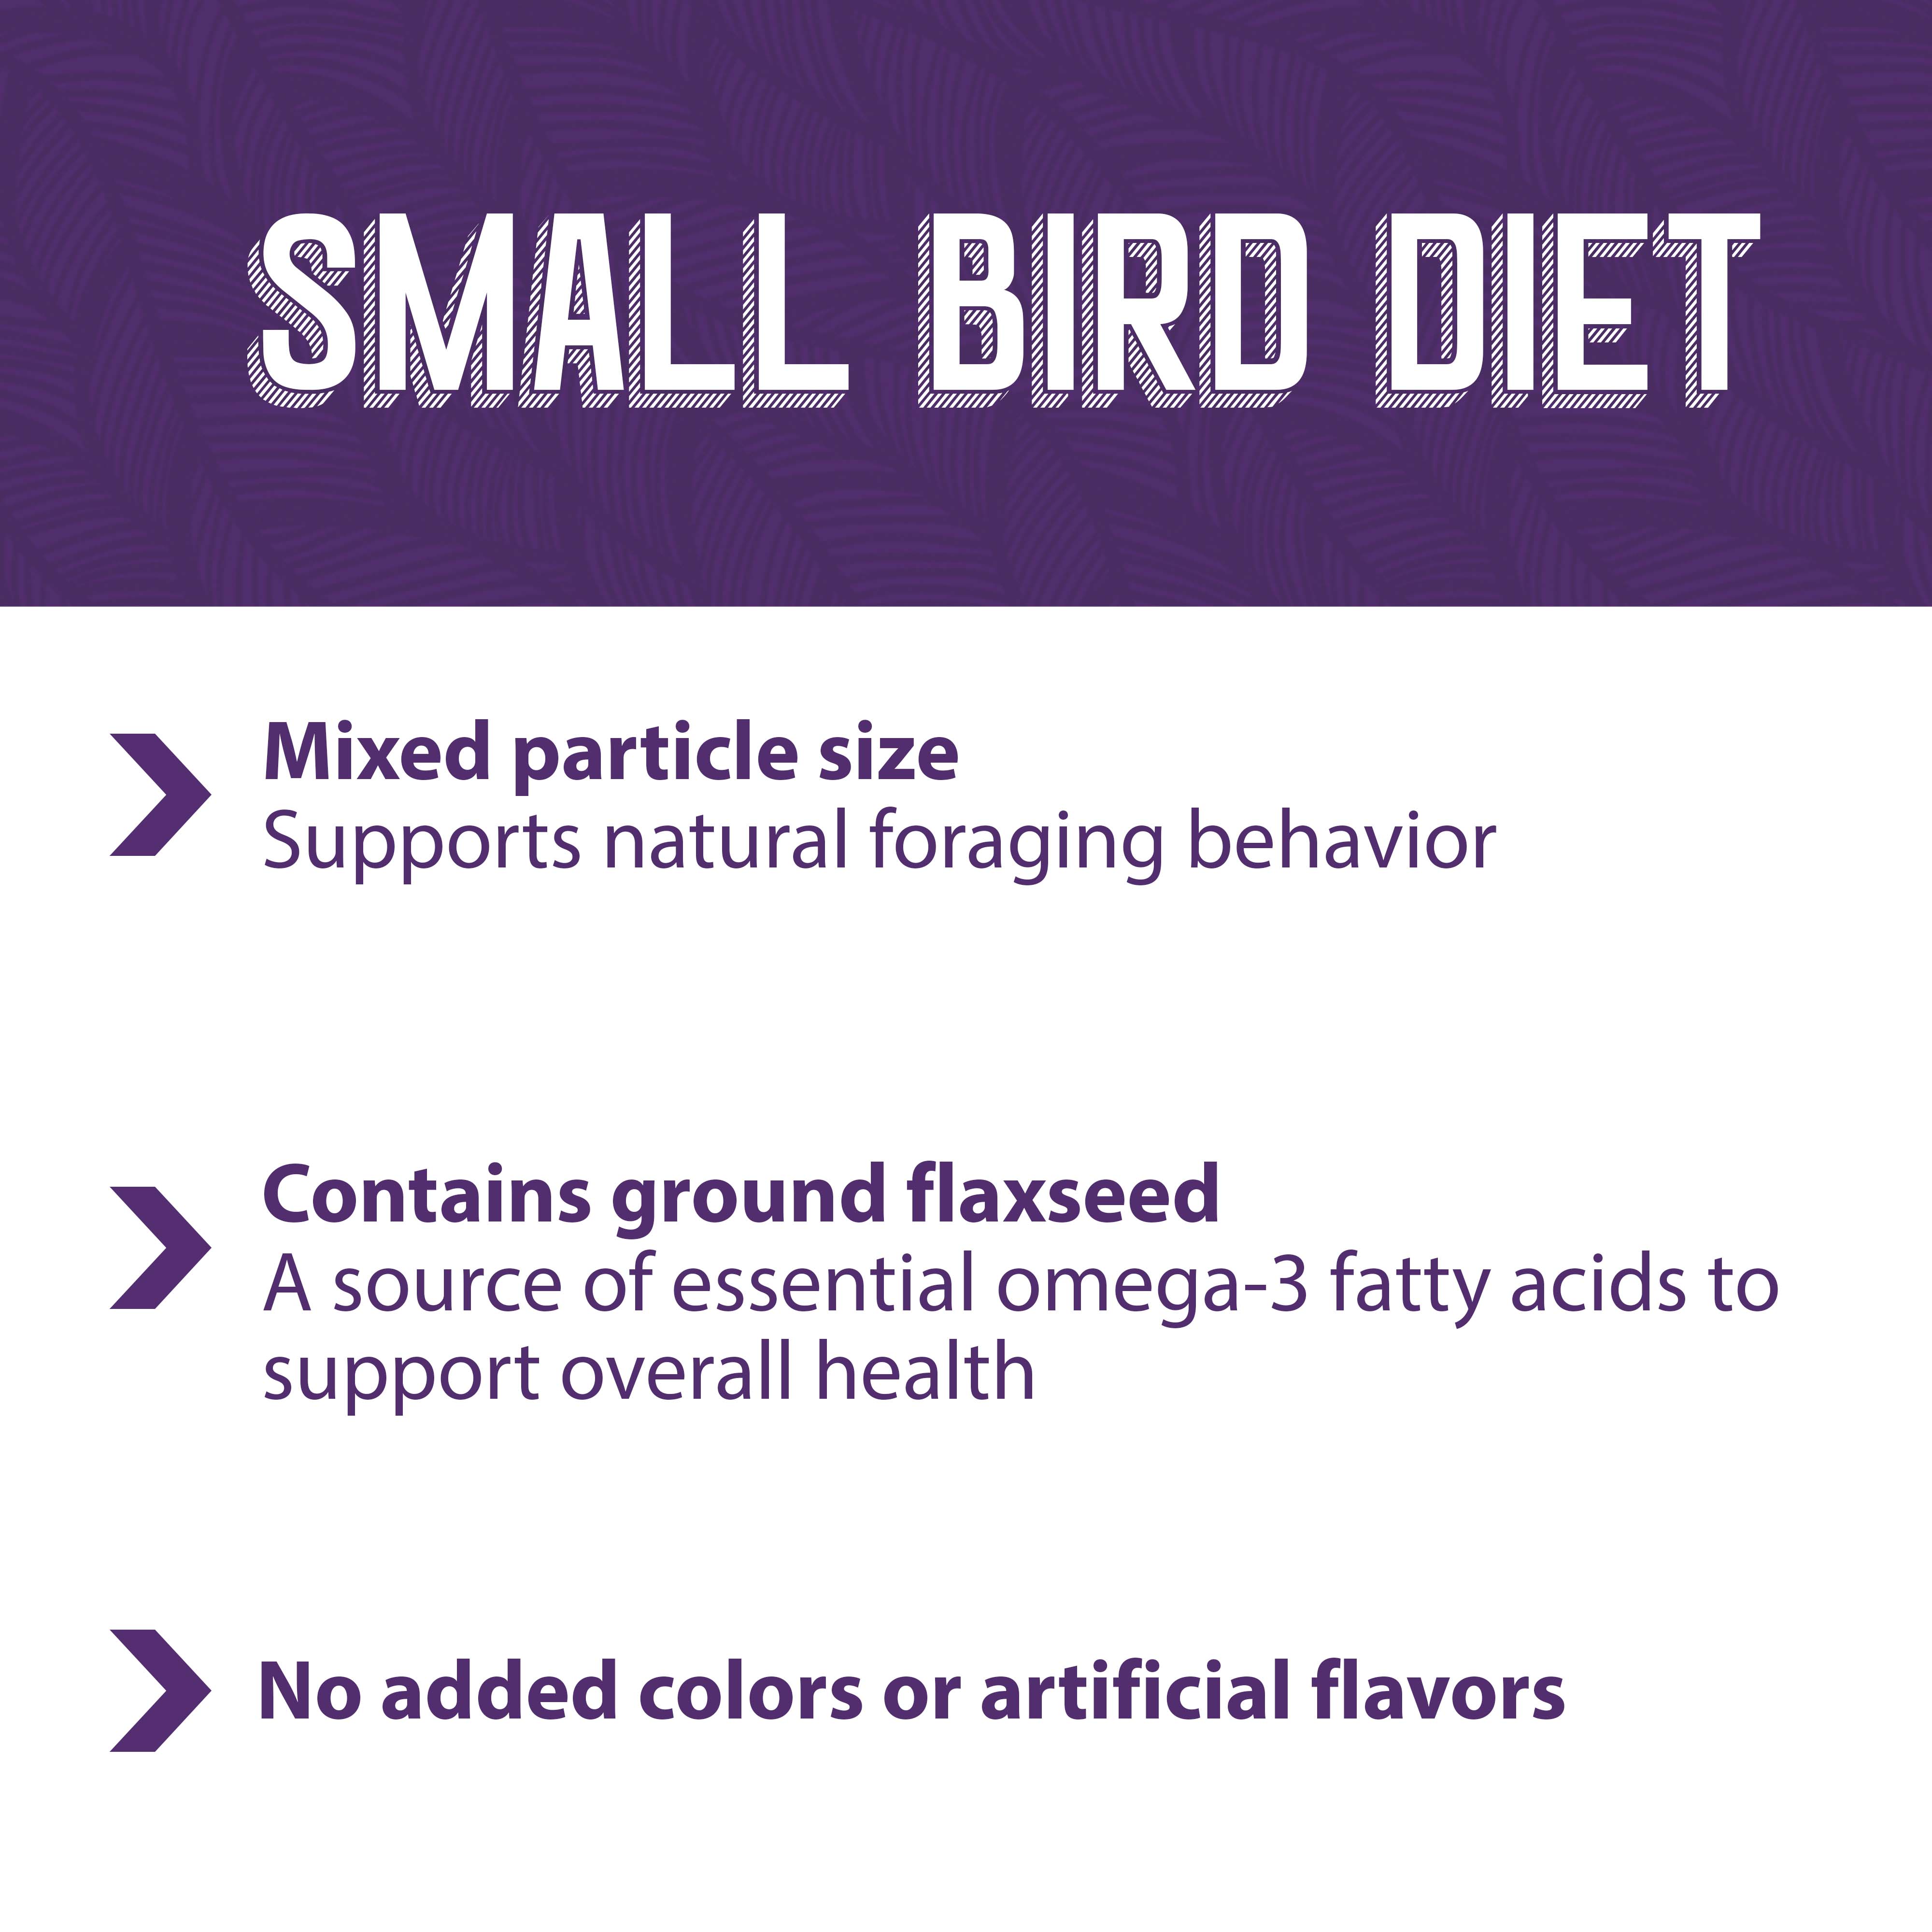 Small bird diet is mixed particles